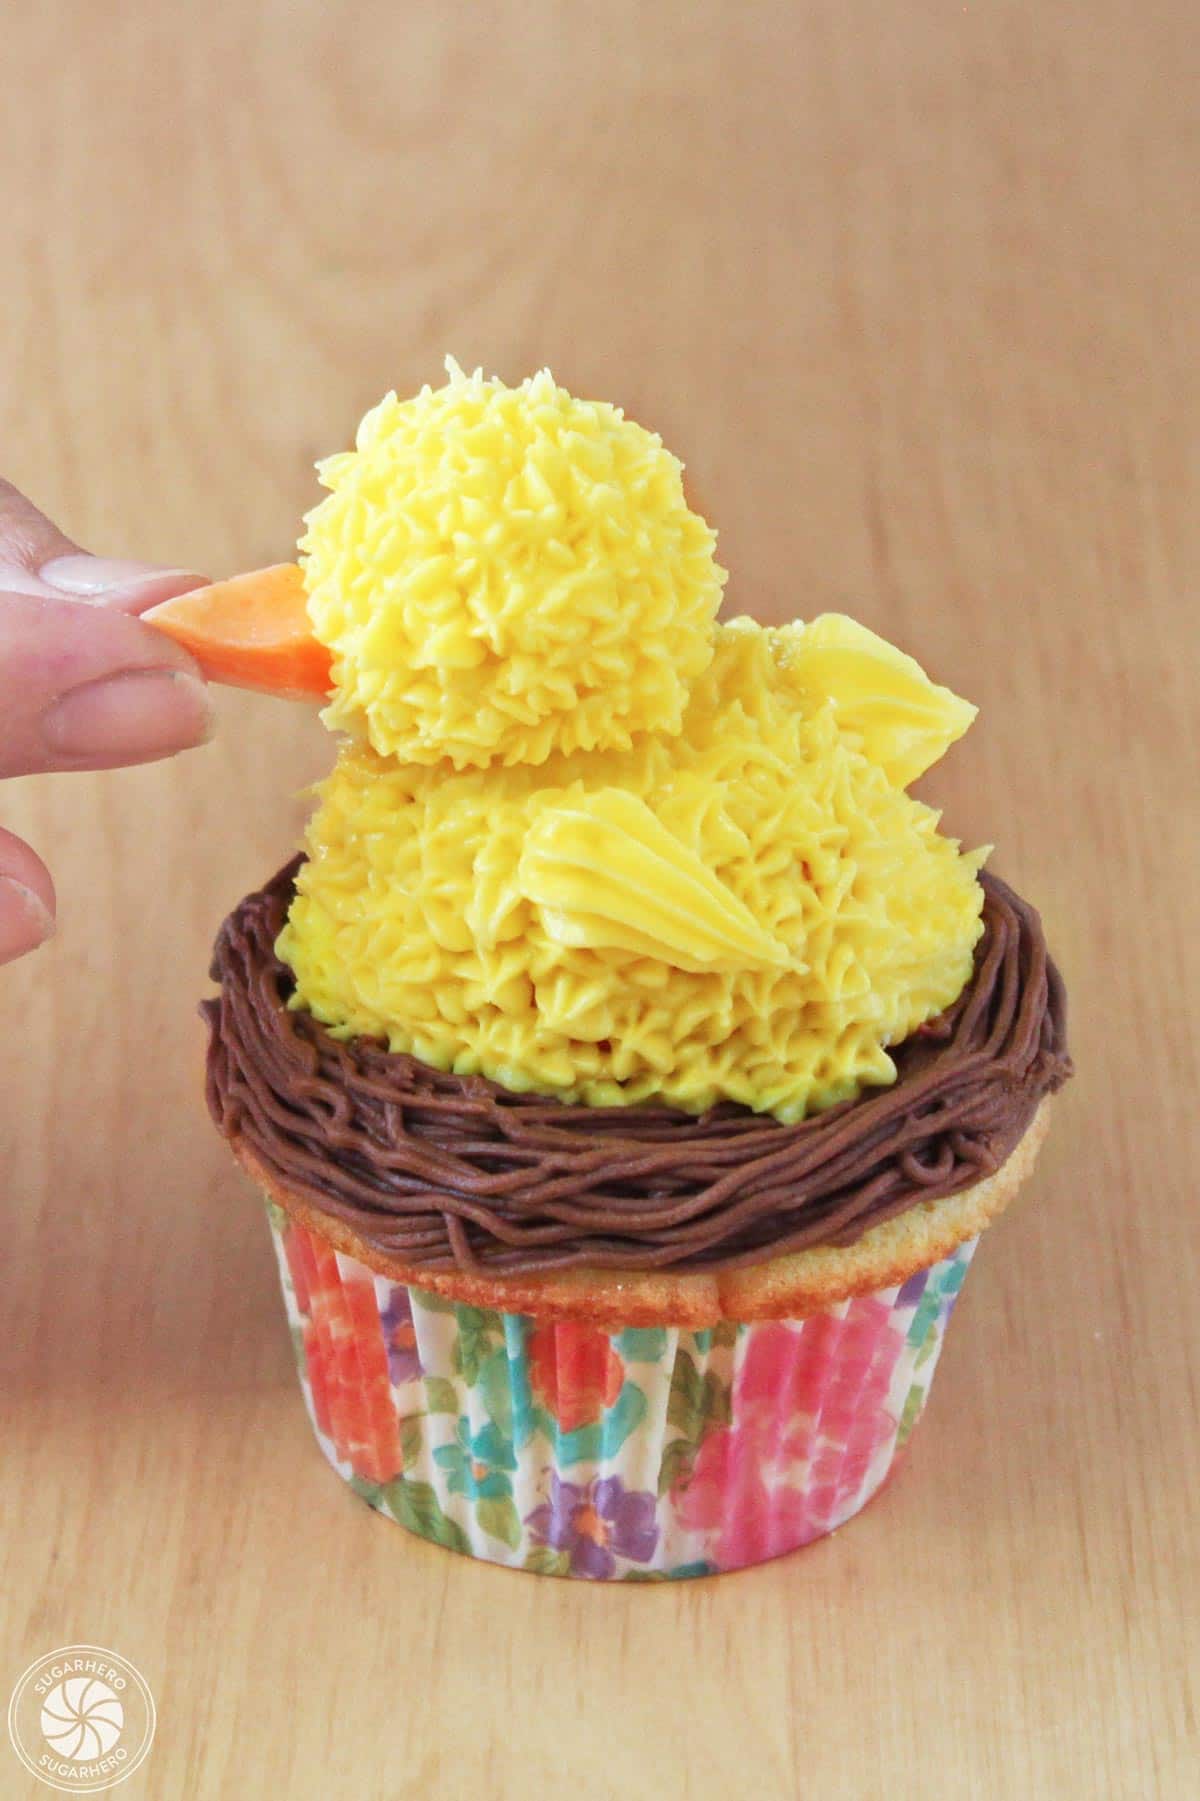 Adding an orange candy beak to an edible Easter chick on top of a cupcake.